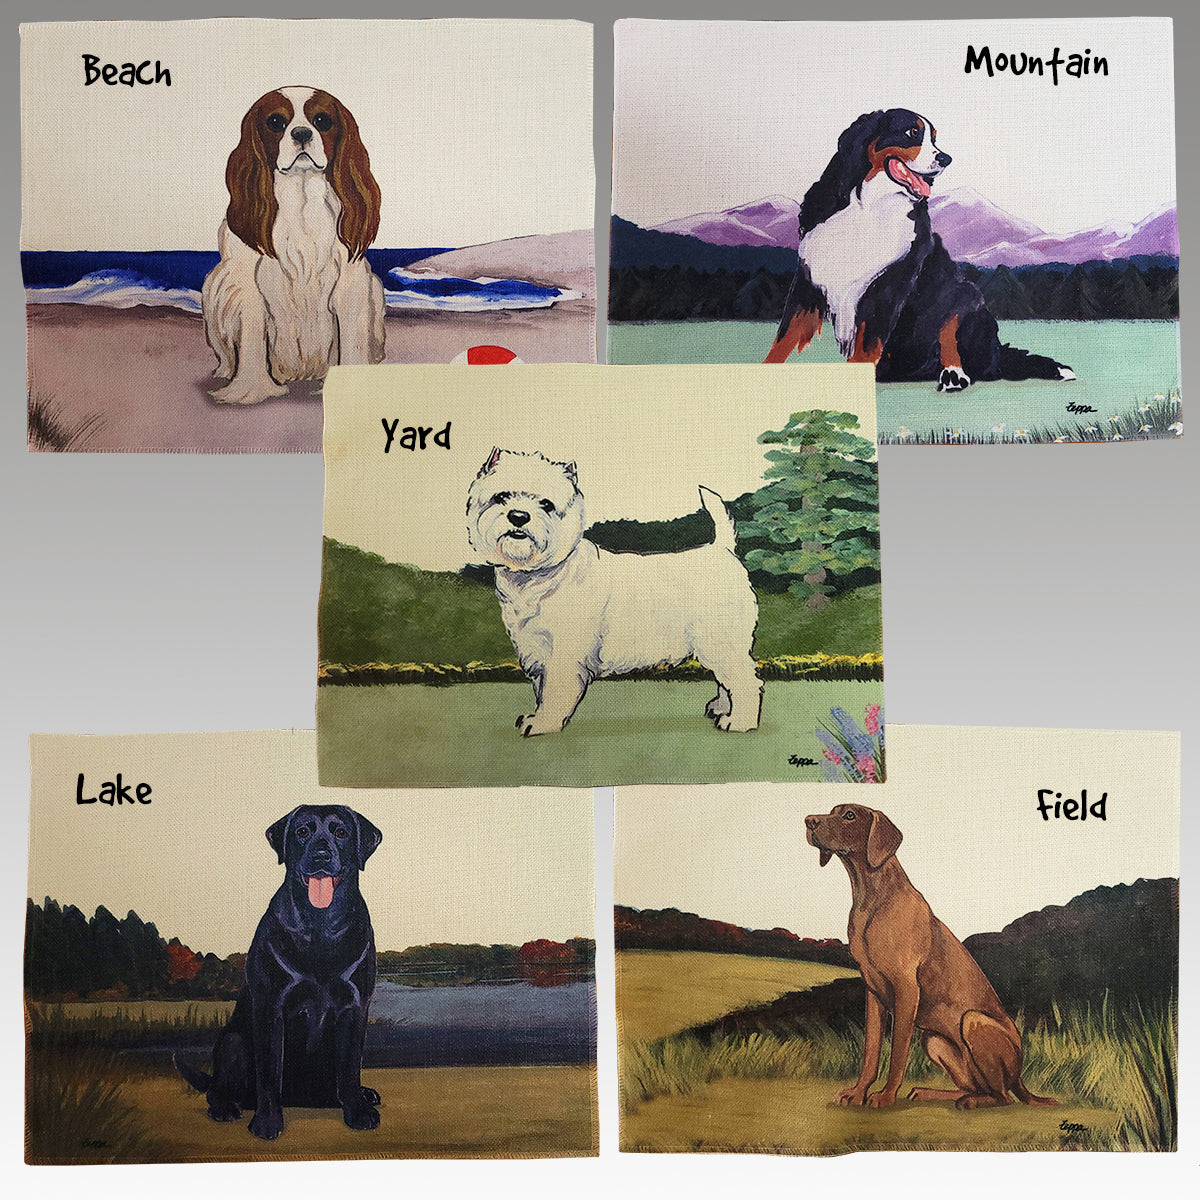 Basset Hound Scenic Placemats